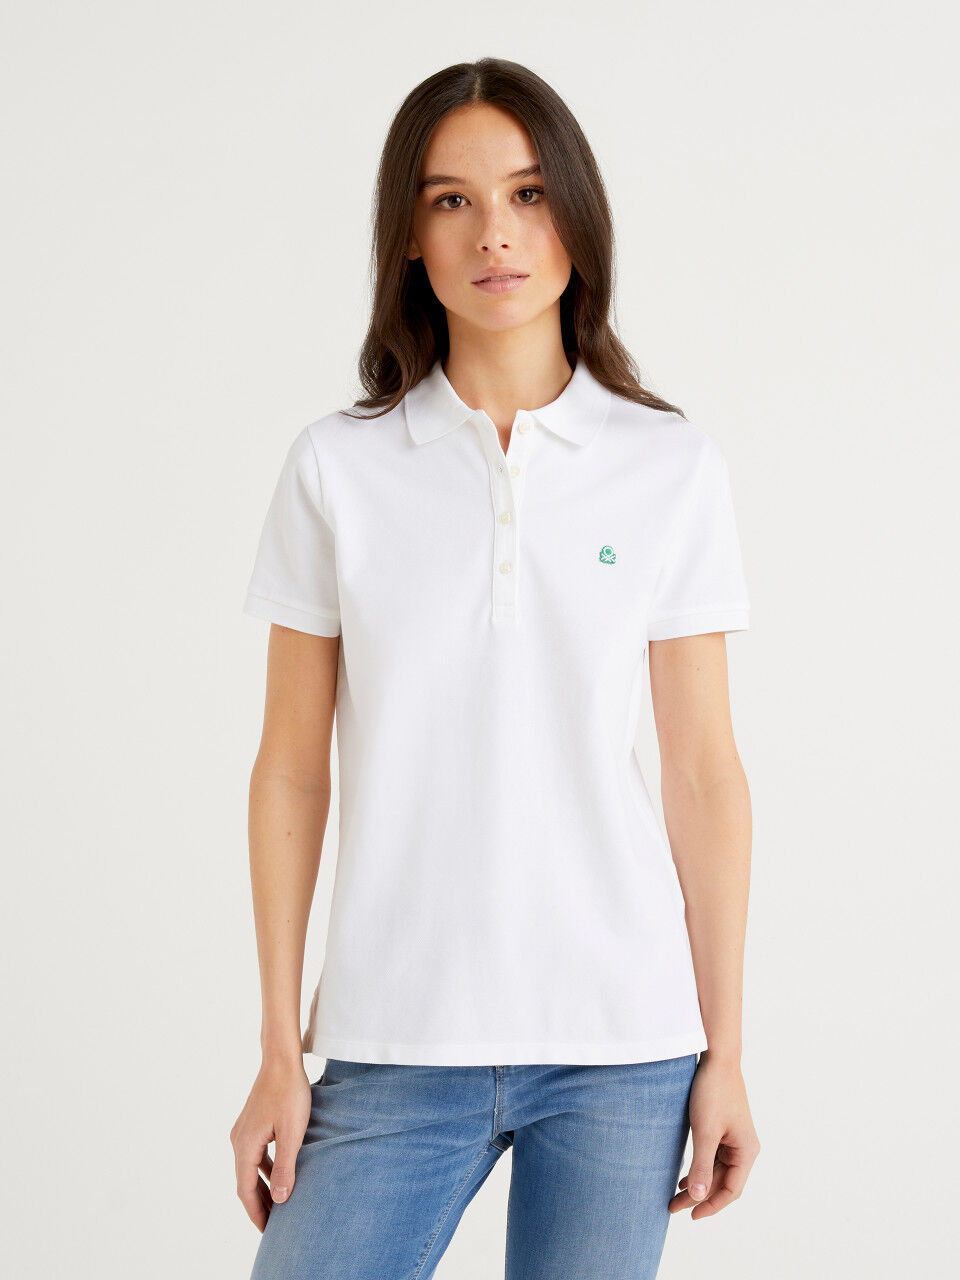 Polo De Style Rugby 100 % Coton United Colors of Benetton Vêtements Tops & T-shirts T-shirts Polos 